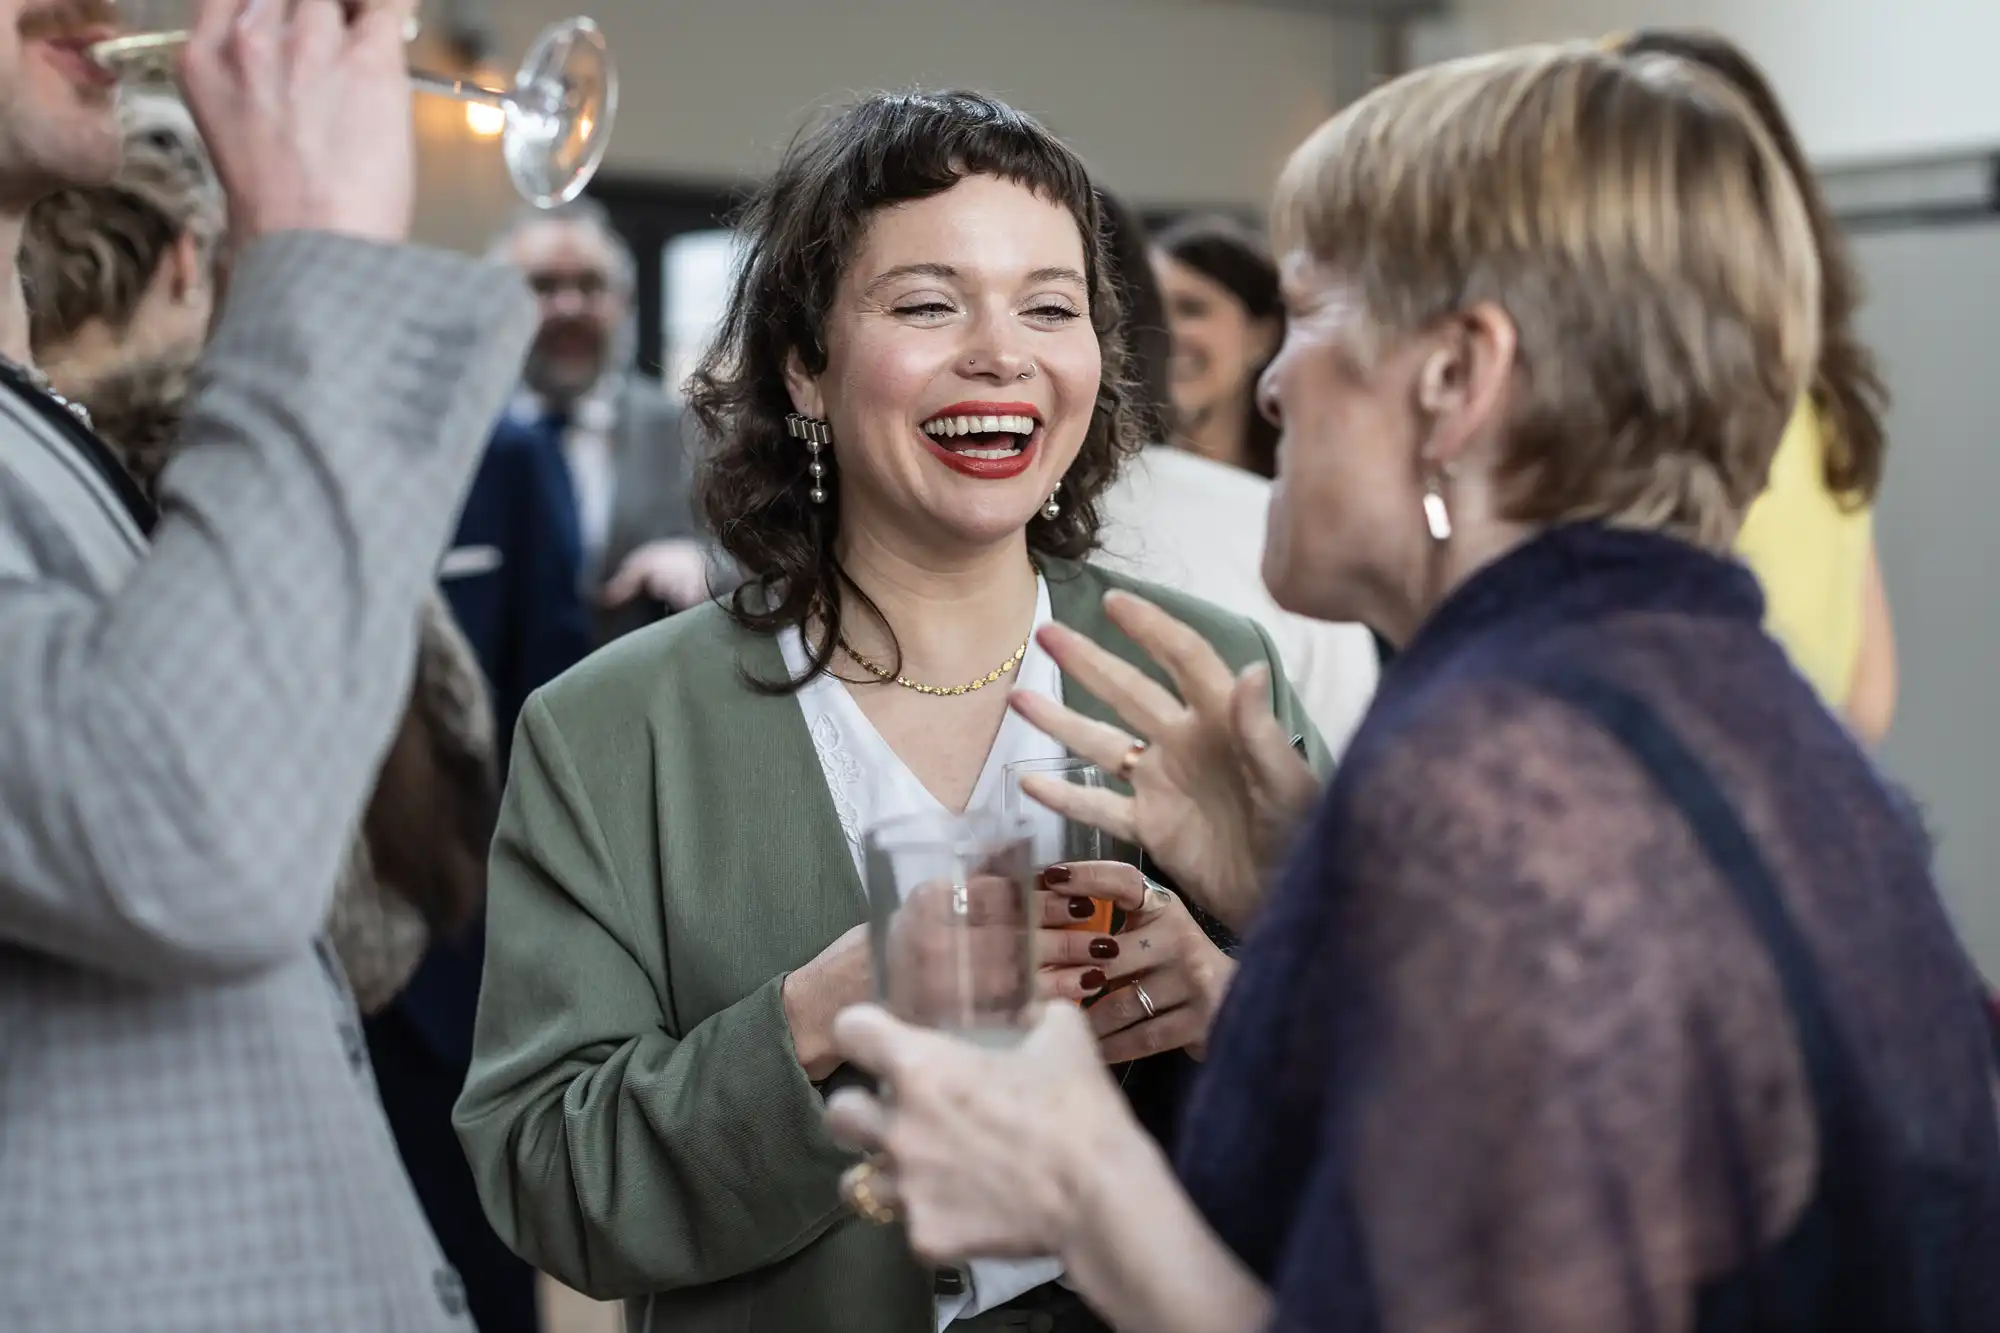 Two women engage in a lively conversation at a social gathering. One holds a drink and smiles broadly, while the other gestures expressively. Other guests are visible in the background.